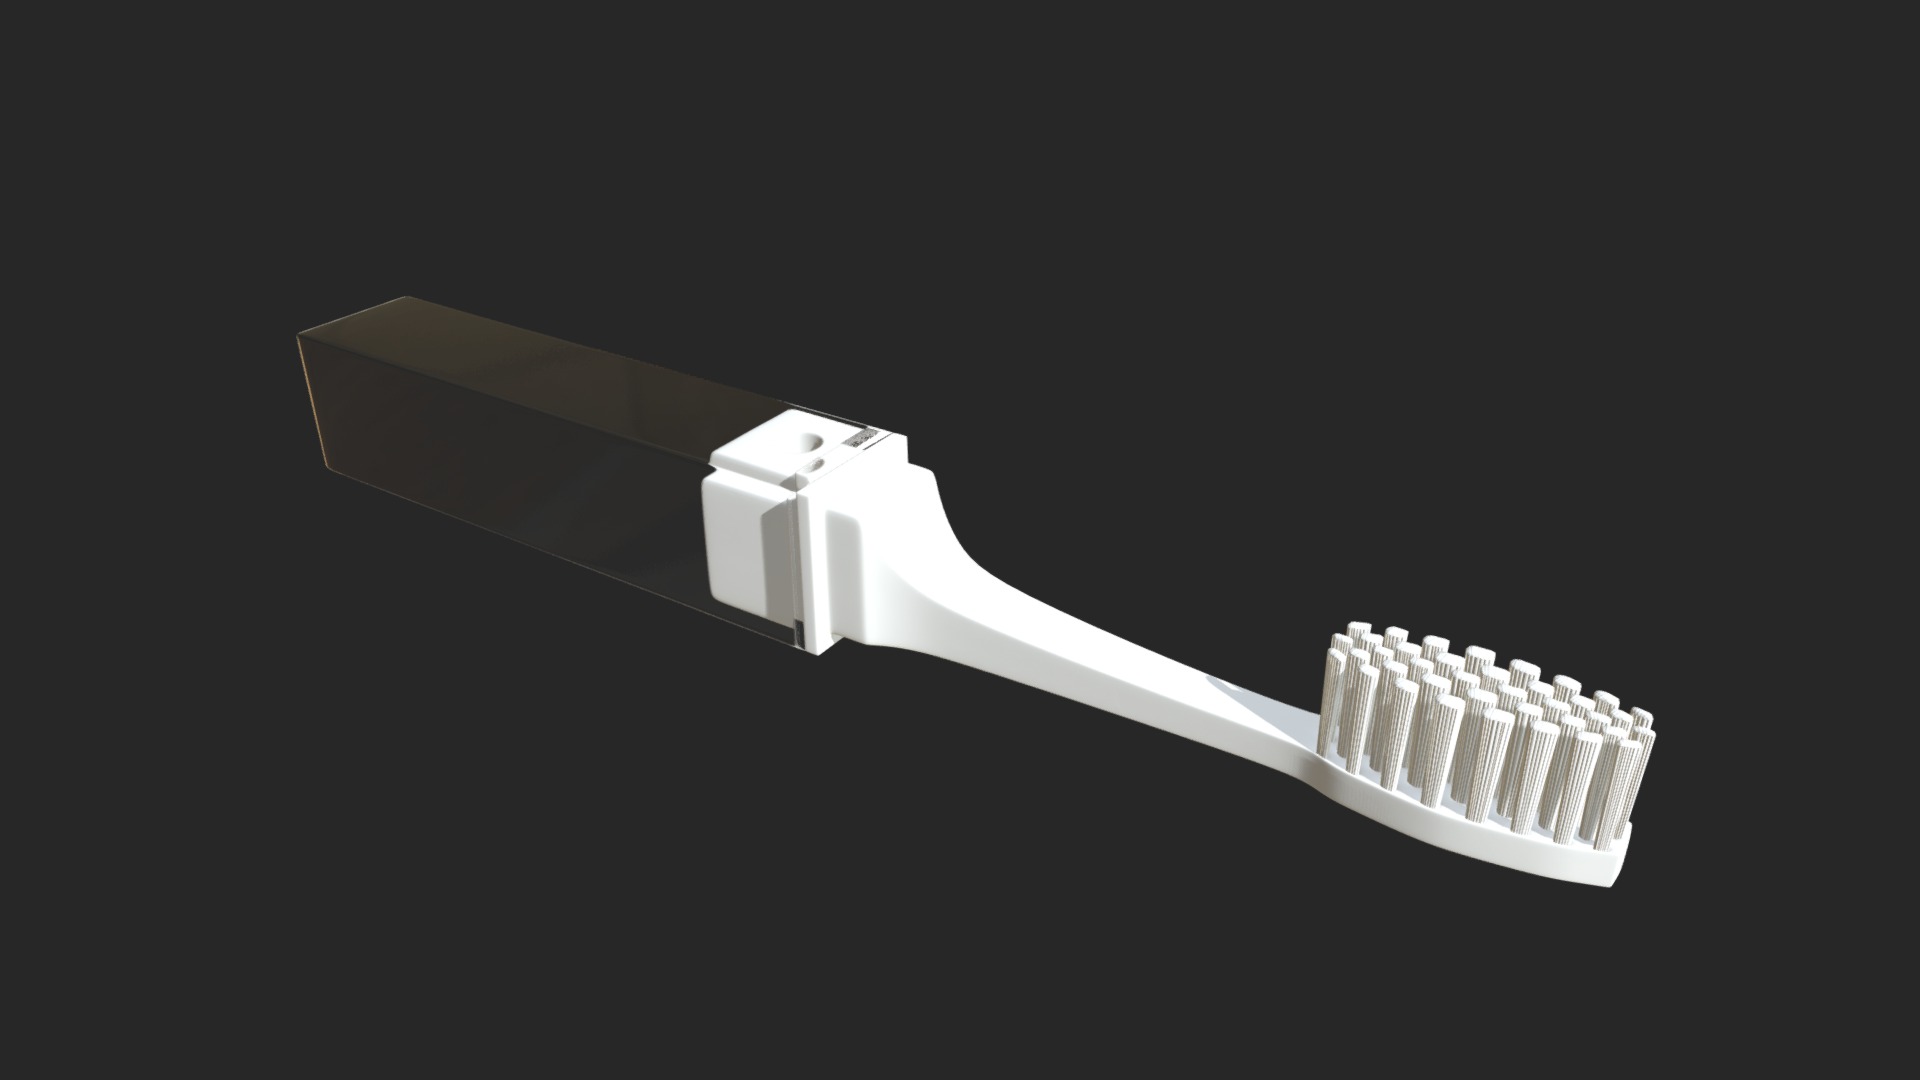 3D model Travel toothbrush - This is a 3D model of the Travel toothbrush. The 3D model is about a white and silver tooth brush.